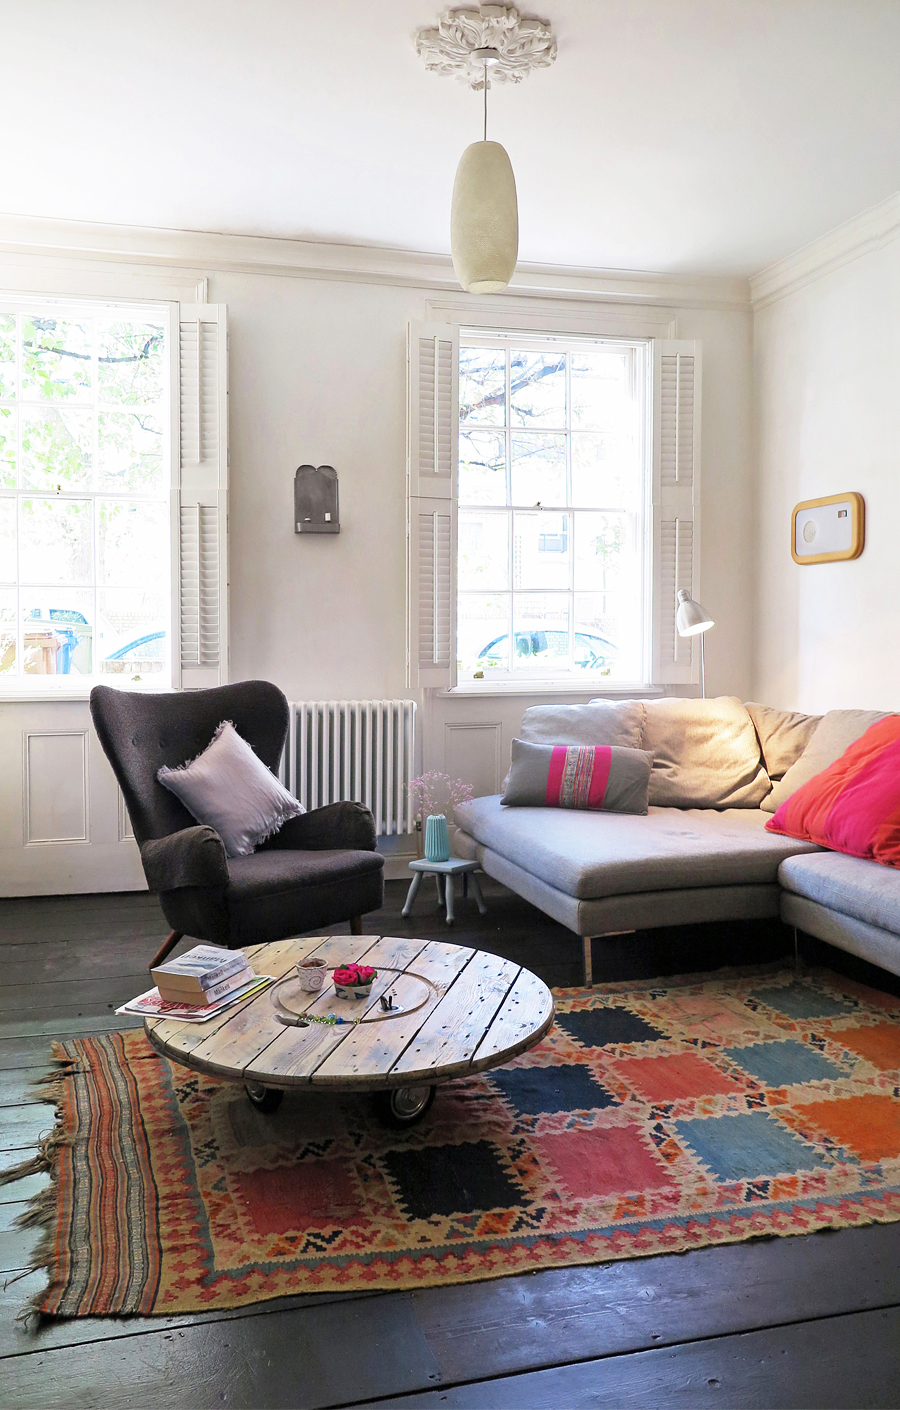 A striking fusion of styles in London | These Four Walls blog